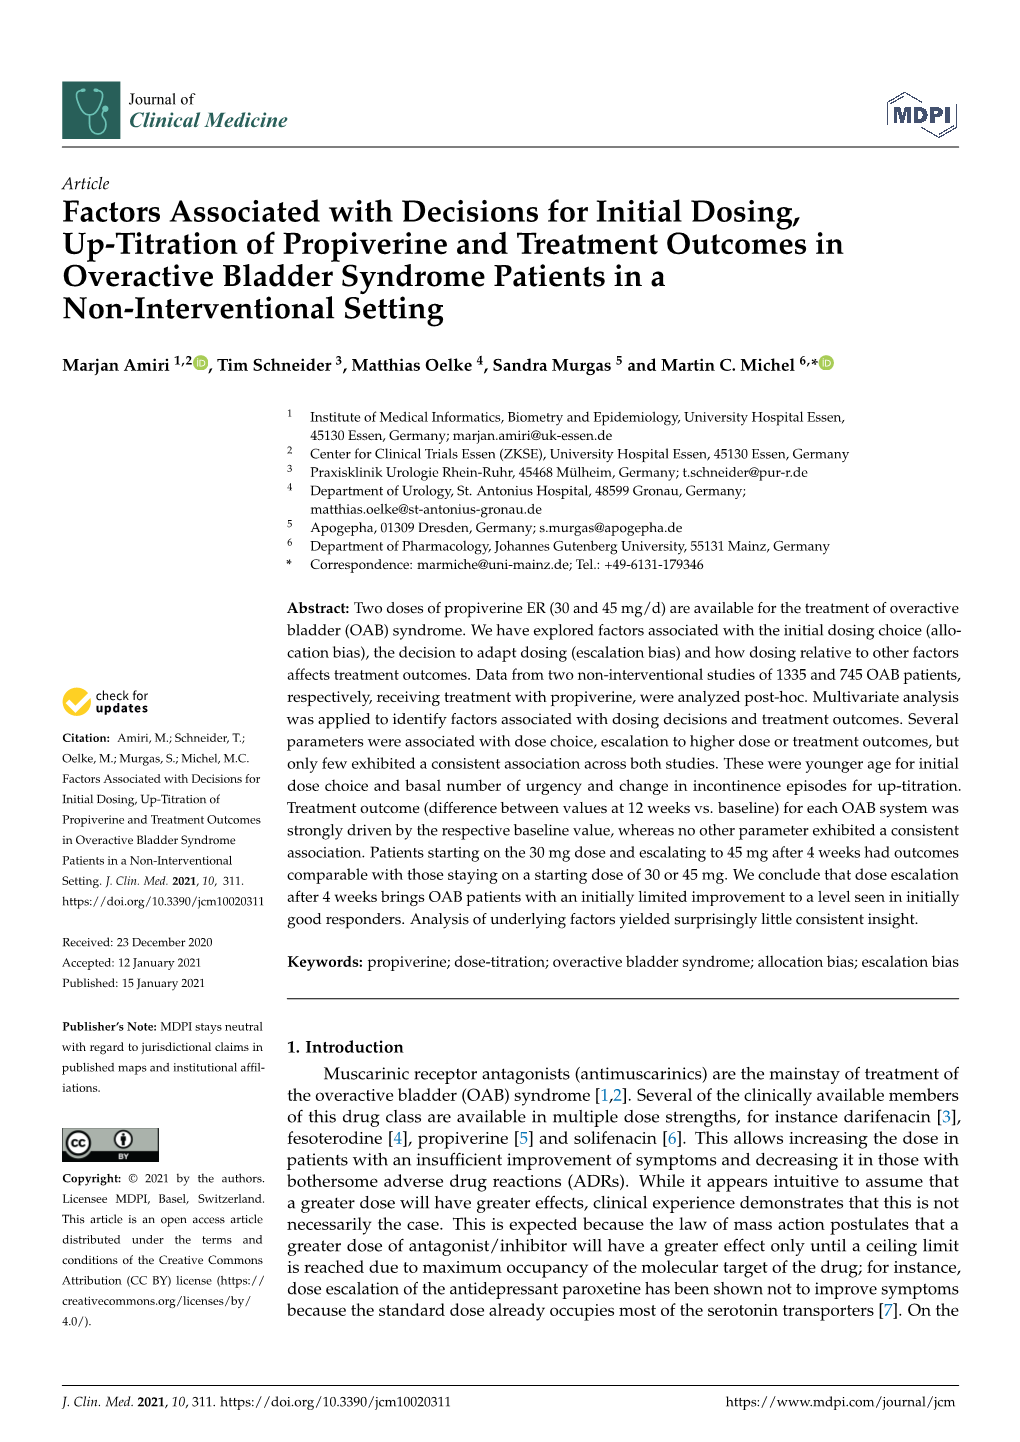 Factors Associated with Decisions for Initial Dosing, Up-Titration of Propiverine and Treatment Outcomes in Overactive Bladder S